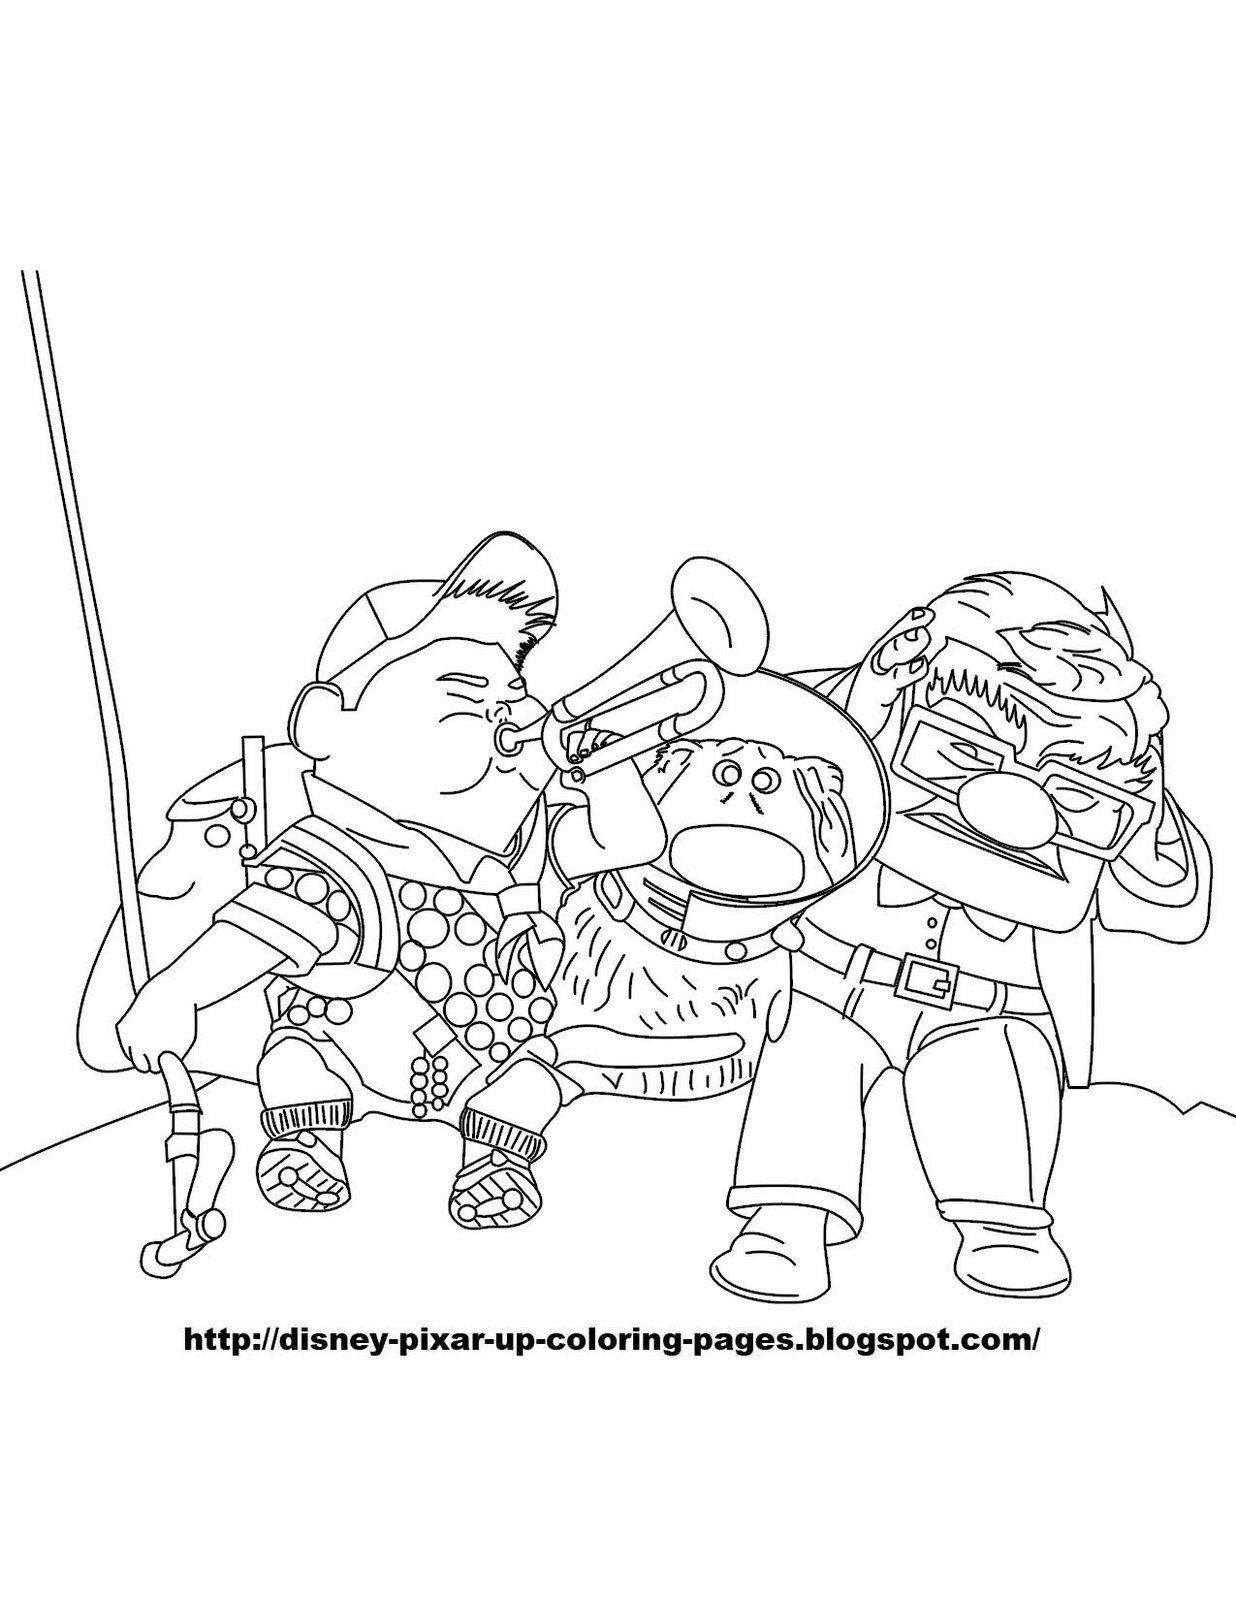 Pixar up coloring pages